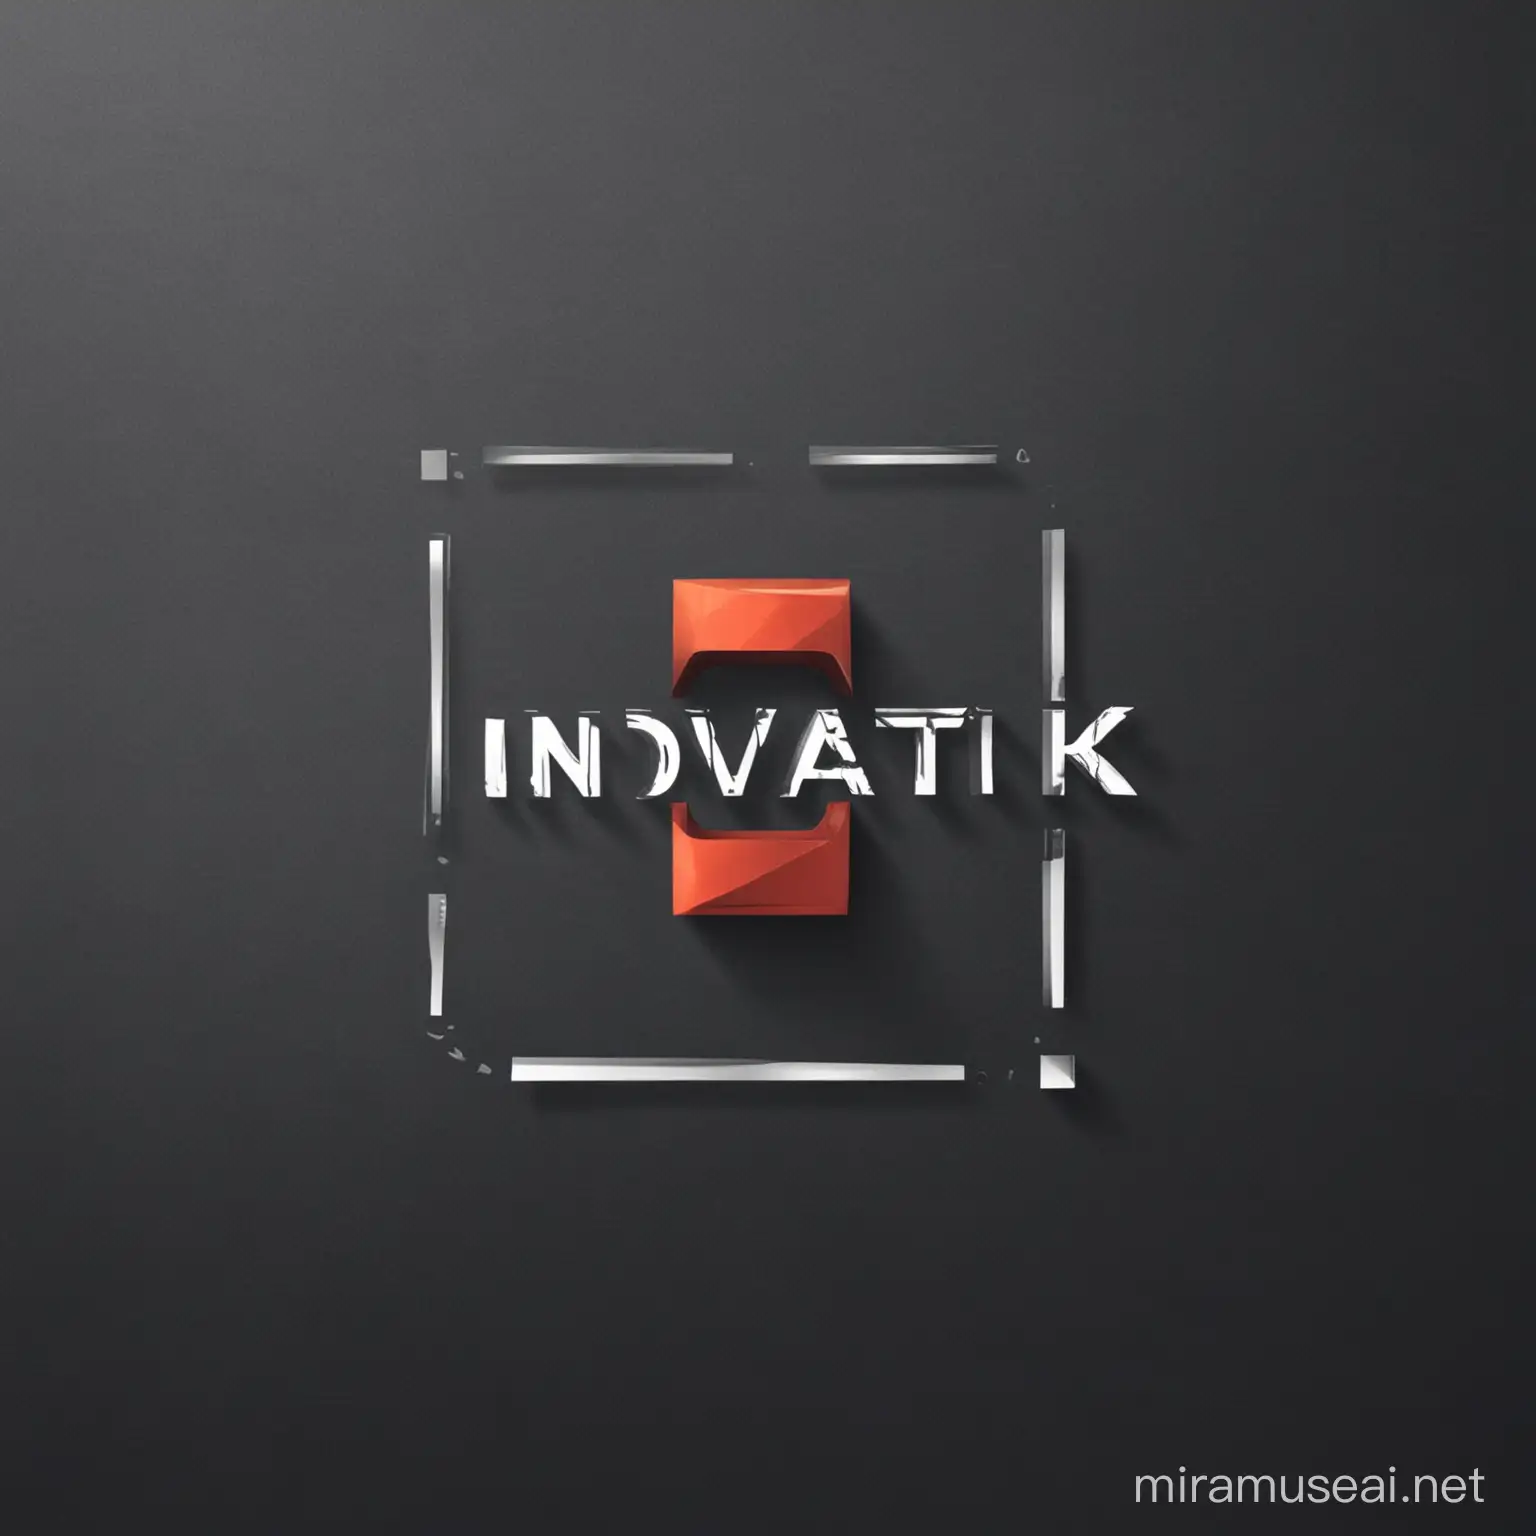 the logo for the it company that implements CRM systems, the name of the company innovatika